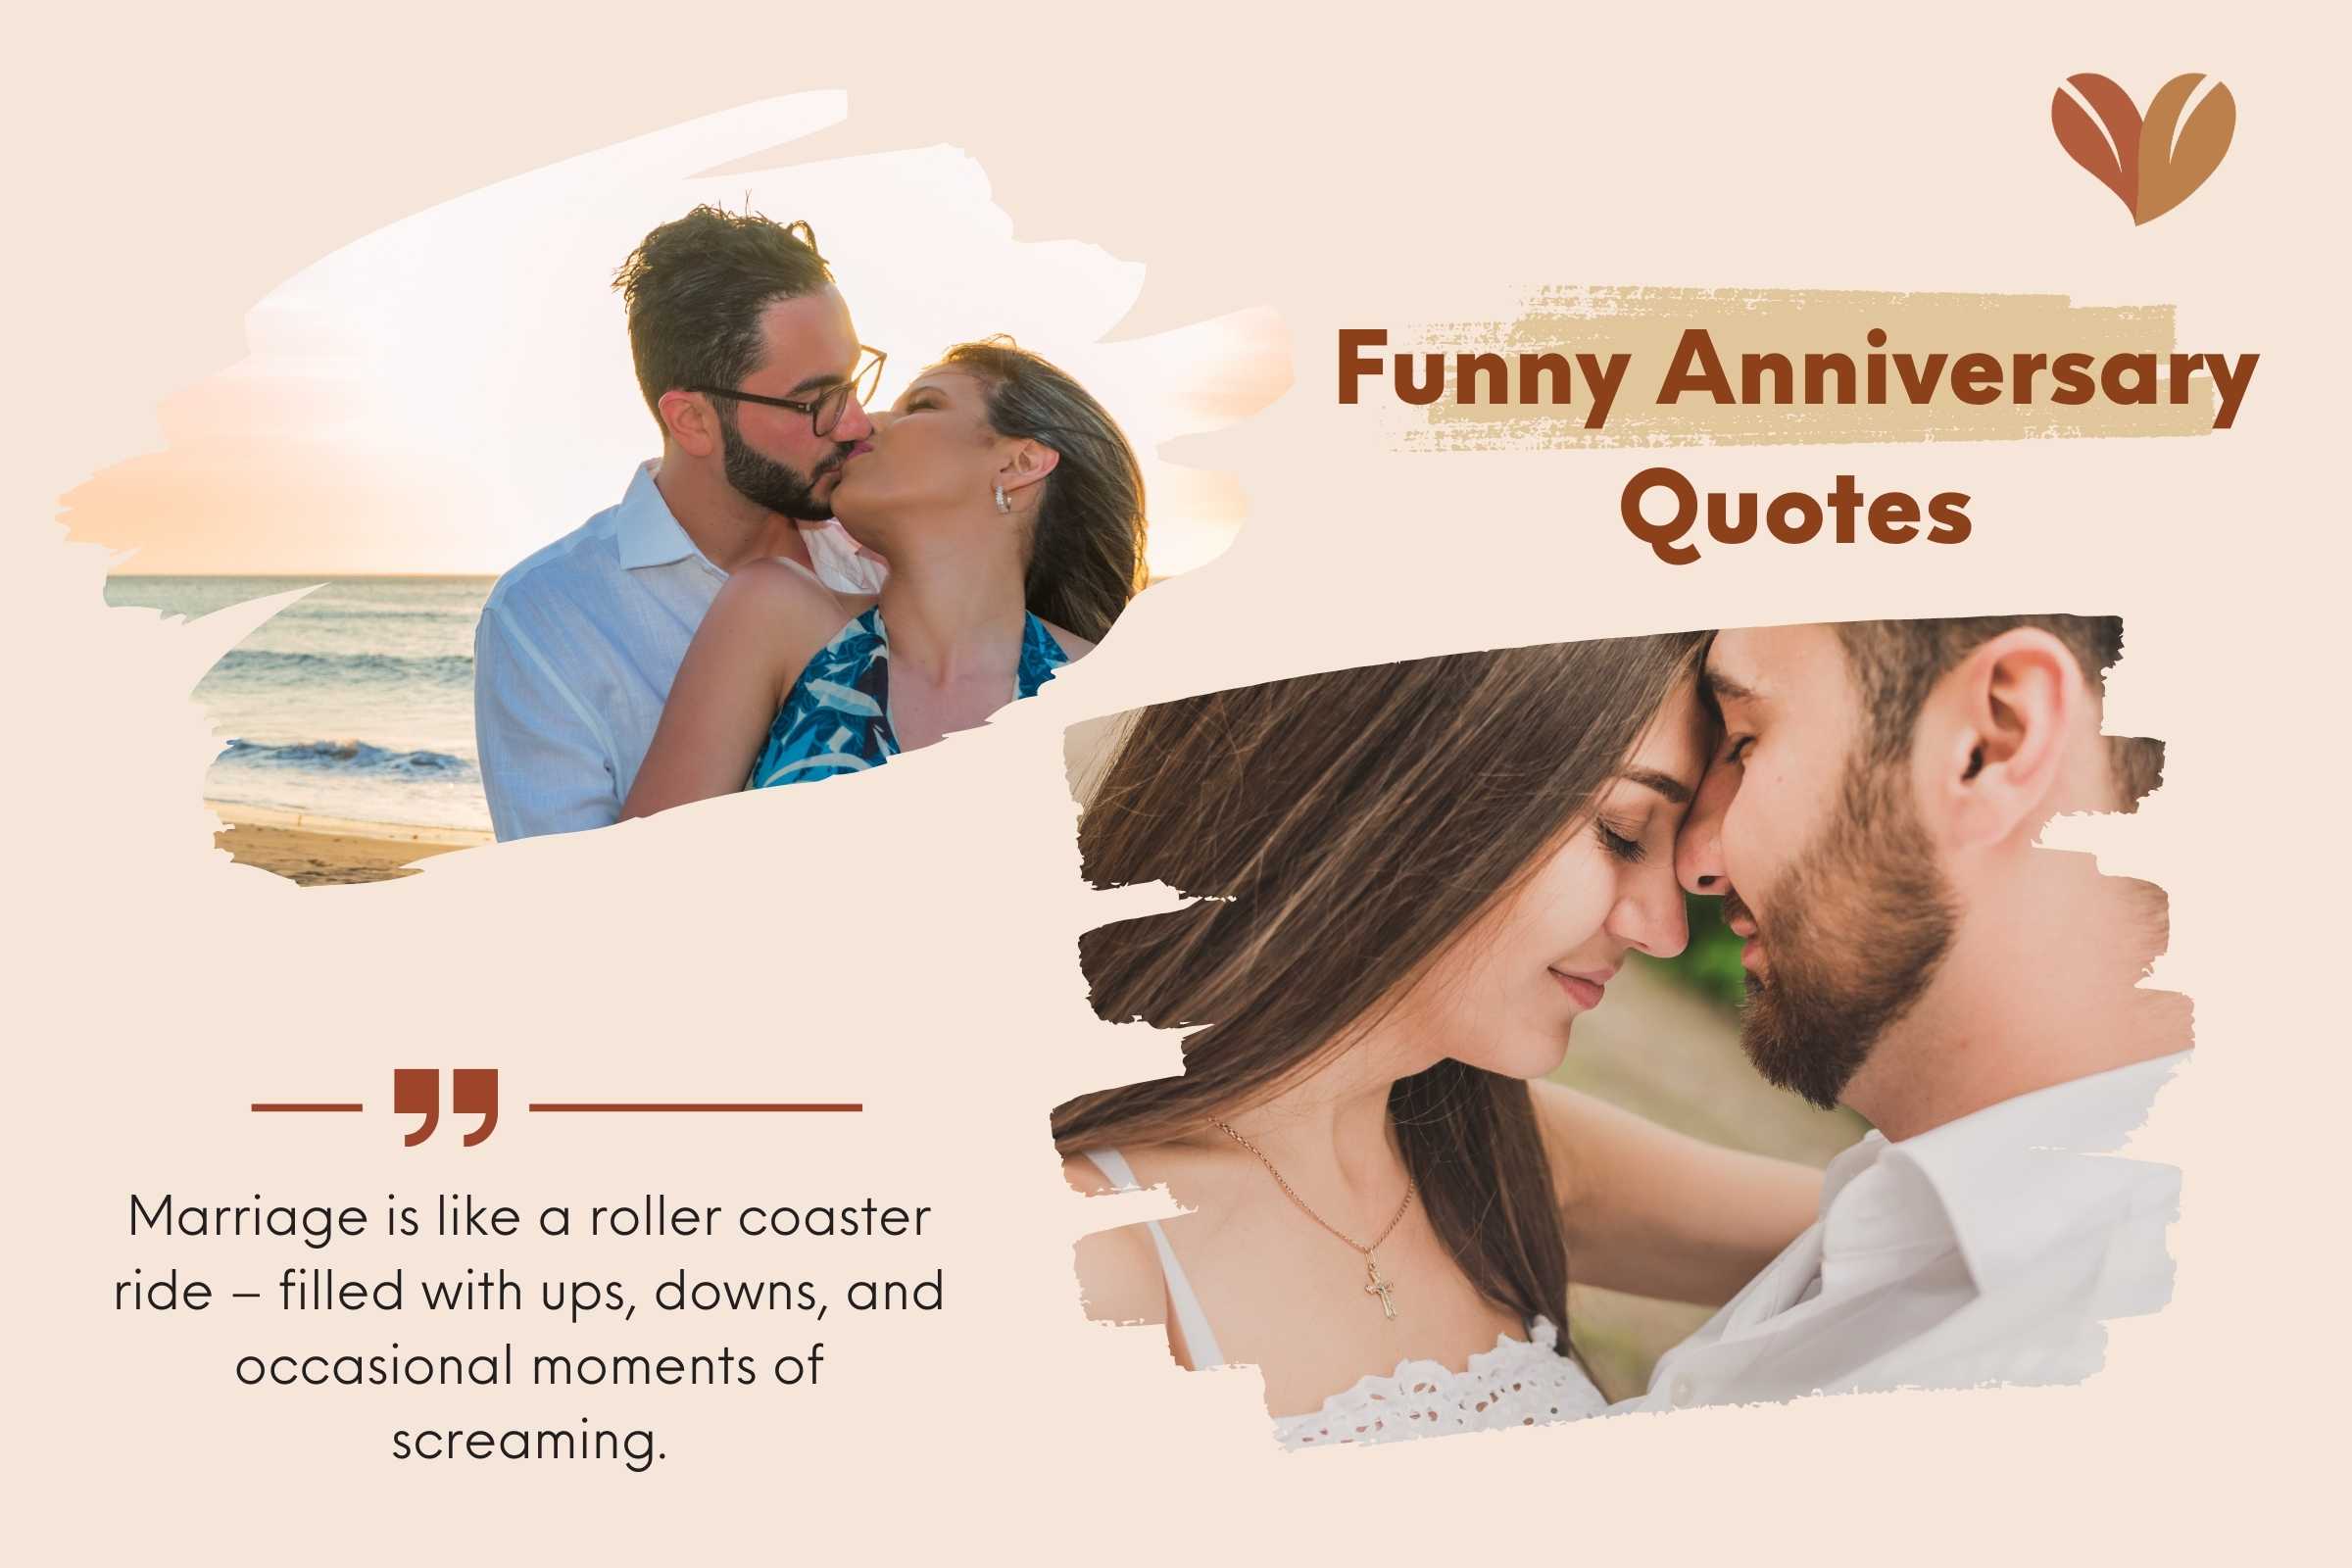 Celebrate love with these heartwarming anniversary saying quotes!